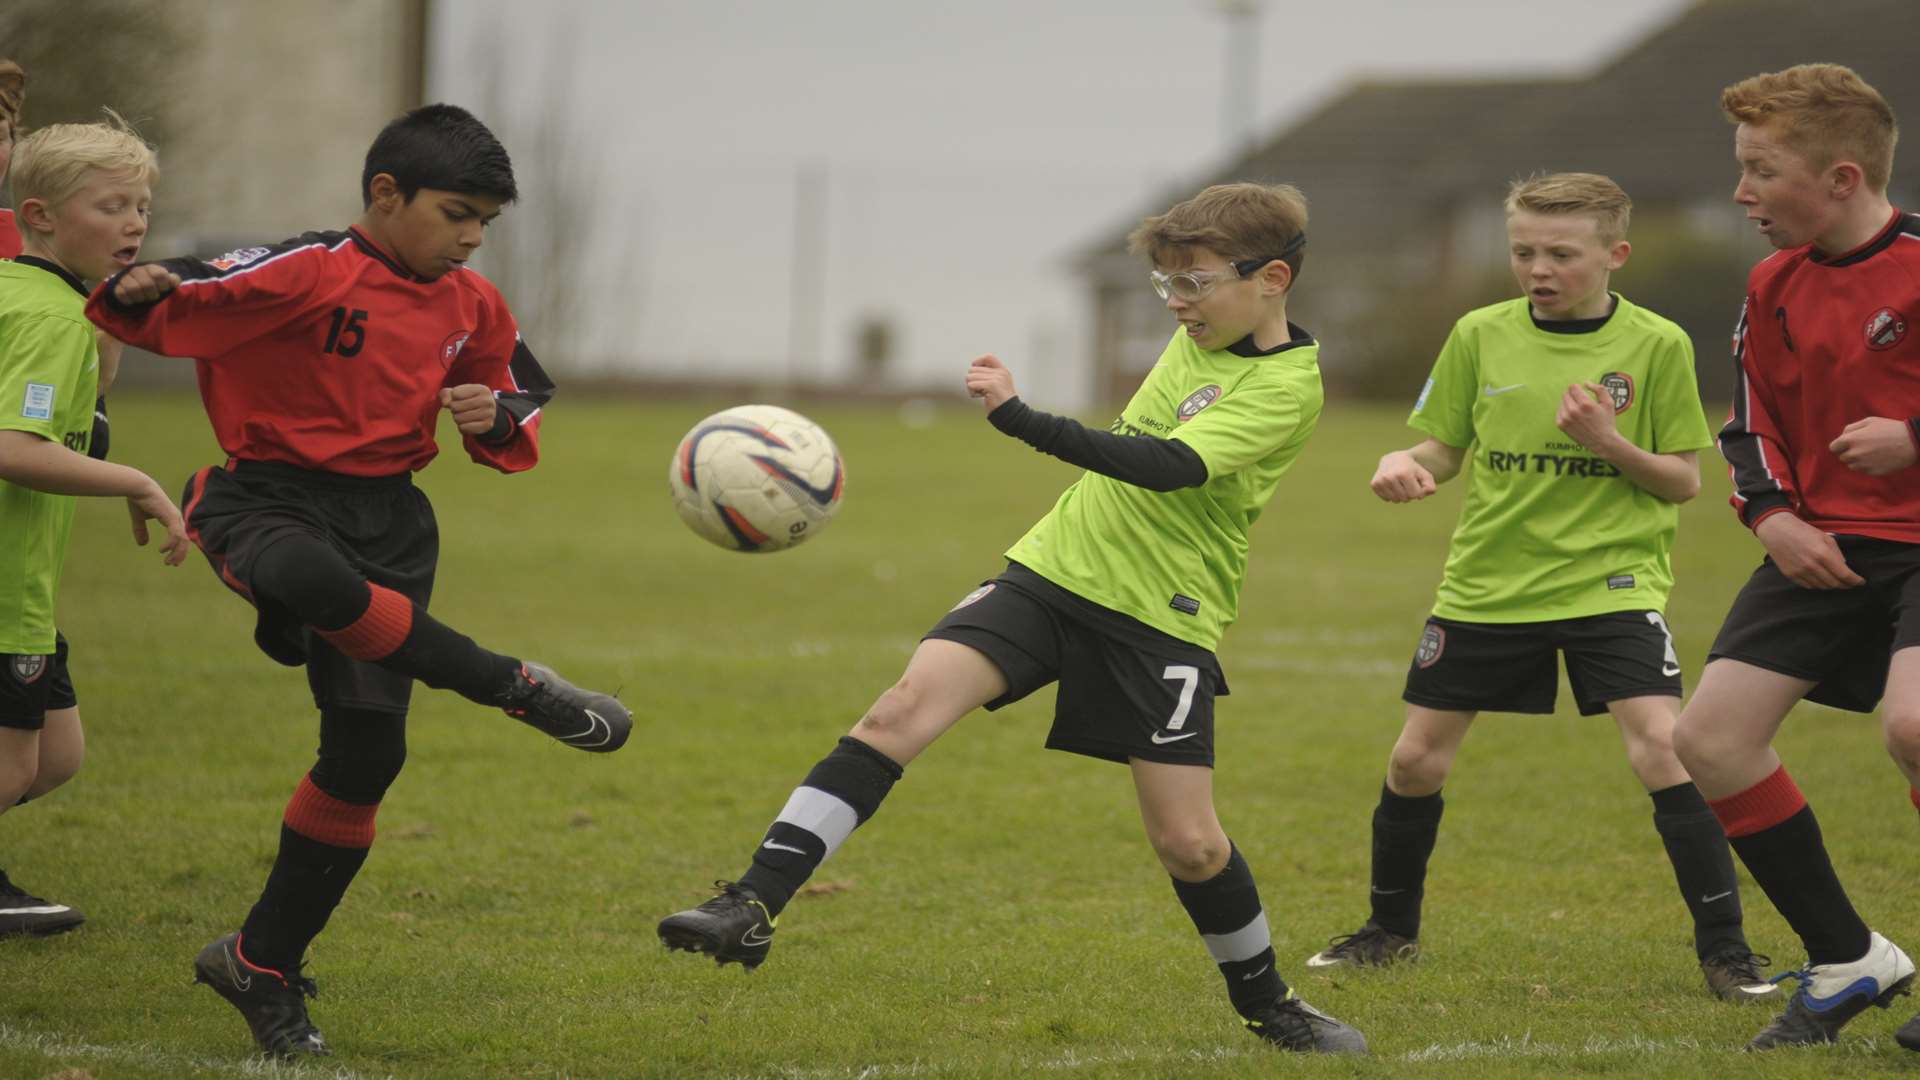 Rainham Kenilworth (red) and Strood on the stretch in Under-11 Division 1 Picture: Chris Davey